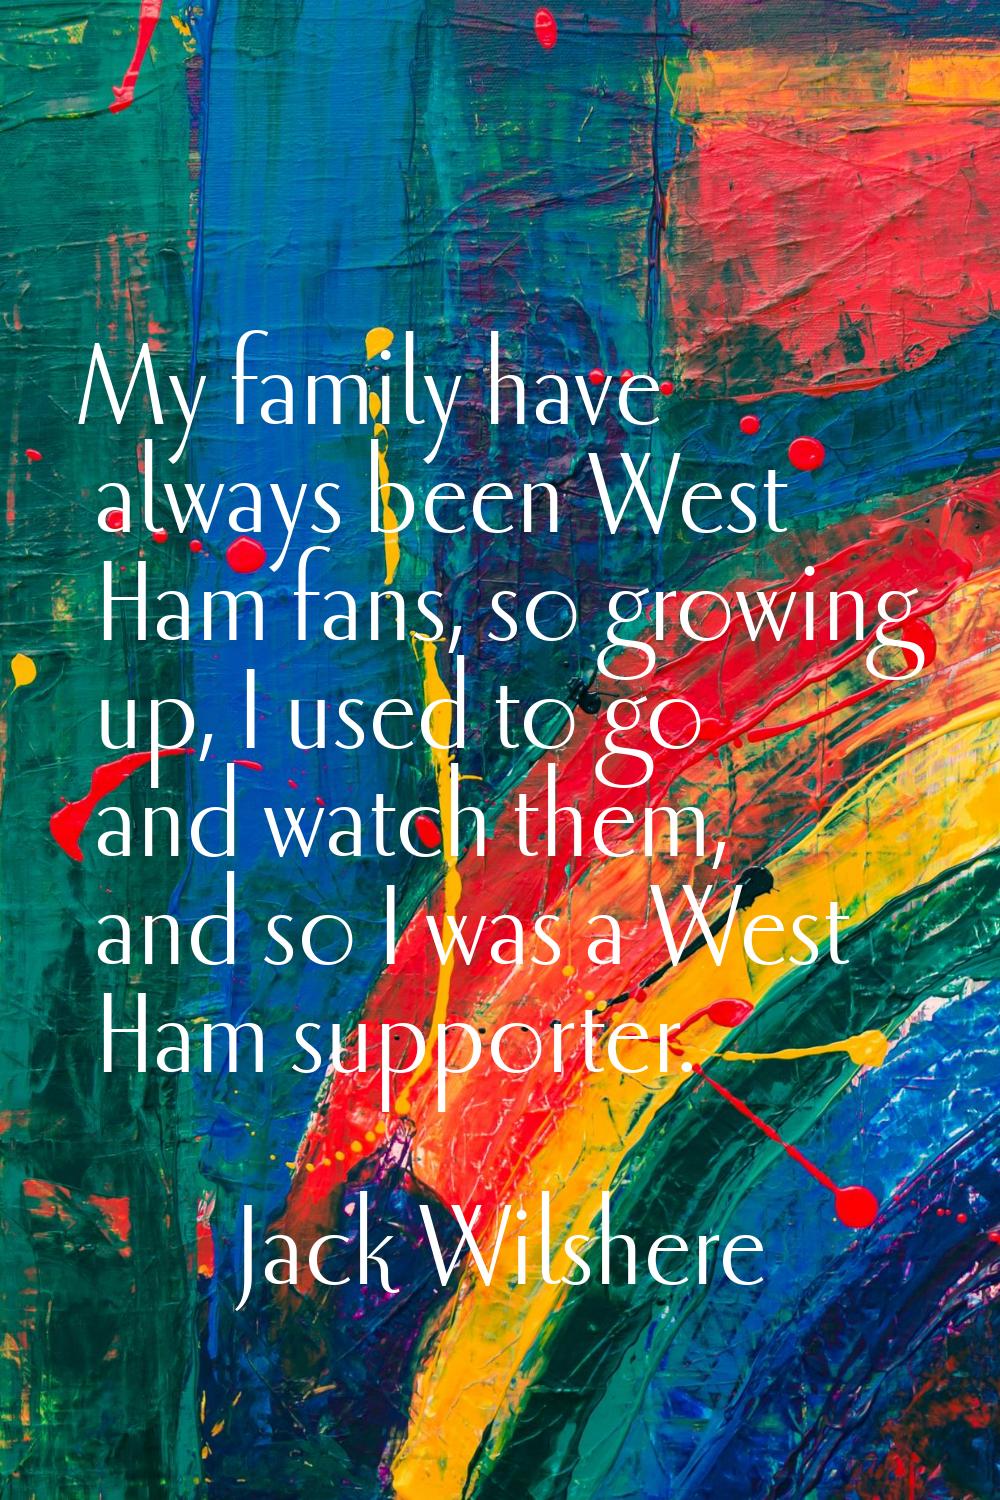 My family have always been West Ham fans, so growing up, I used to go and watch them, and so I was 